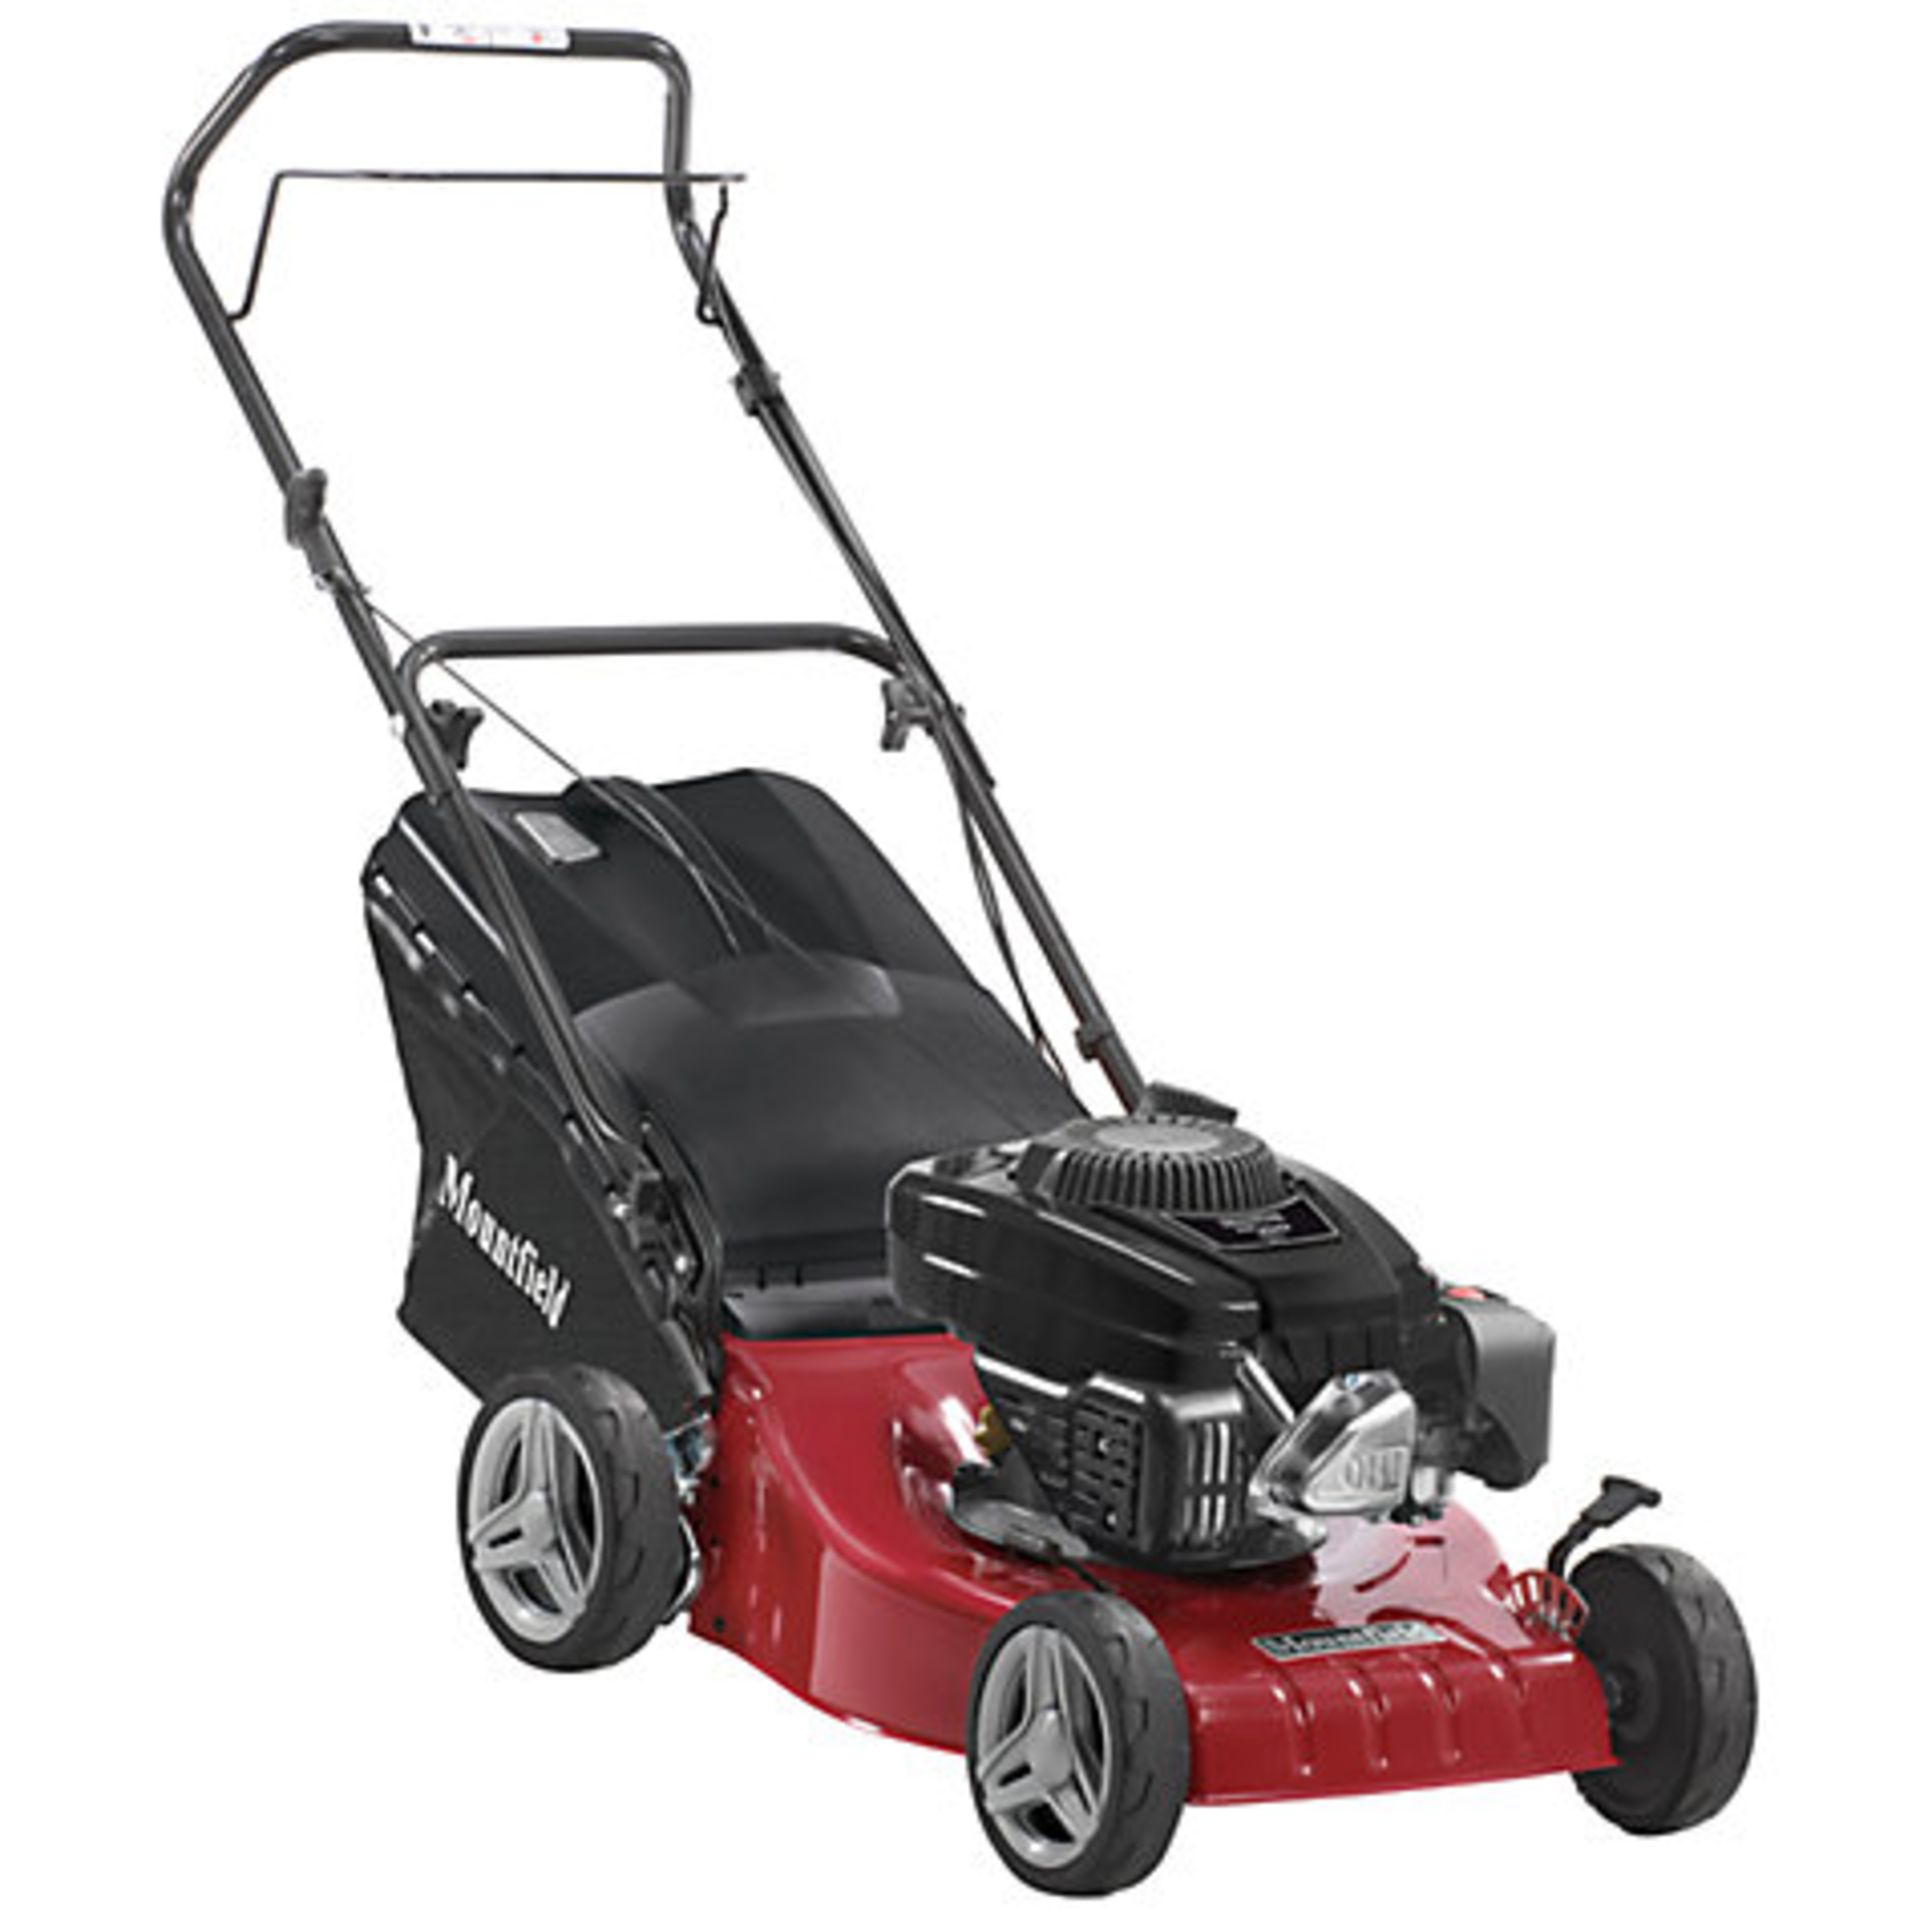 1 x BOXED MOUNTFIELD S4T1 41CM HAND PROPELLED PETROL LAWNMOWER RRP £220 10.05.17 *PLEASE NOTE THAT